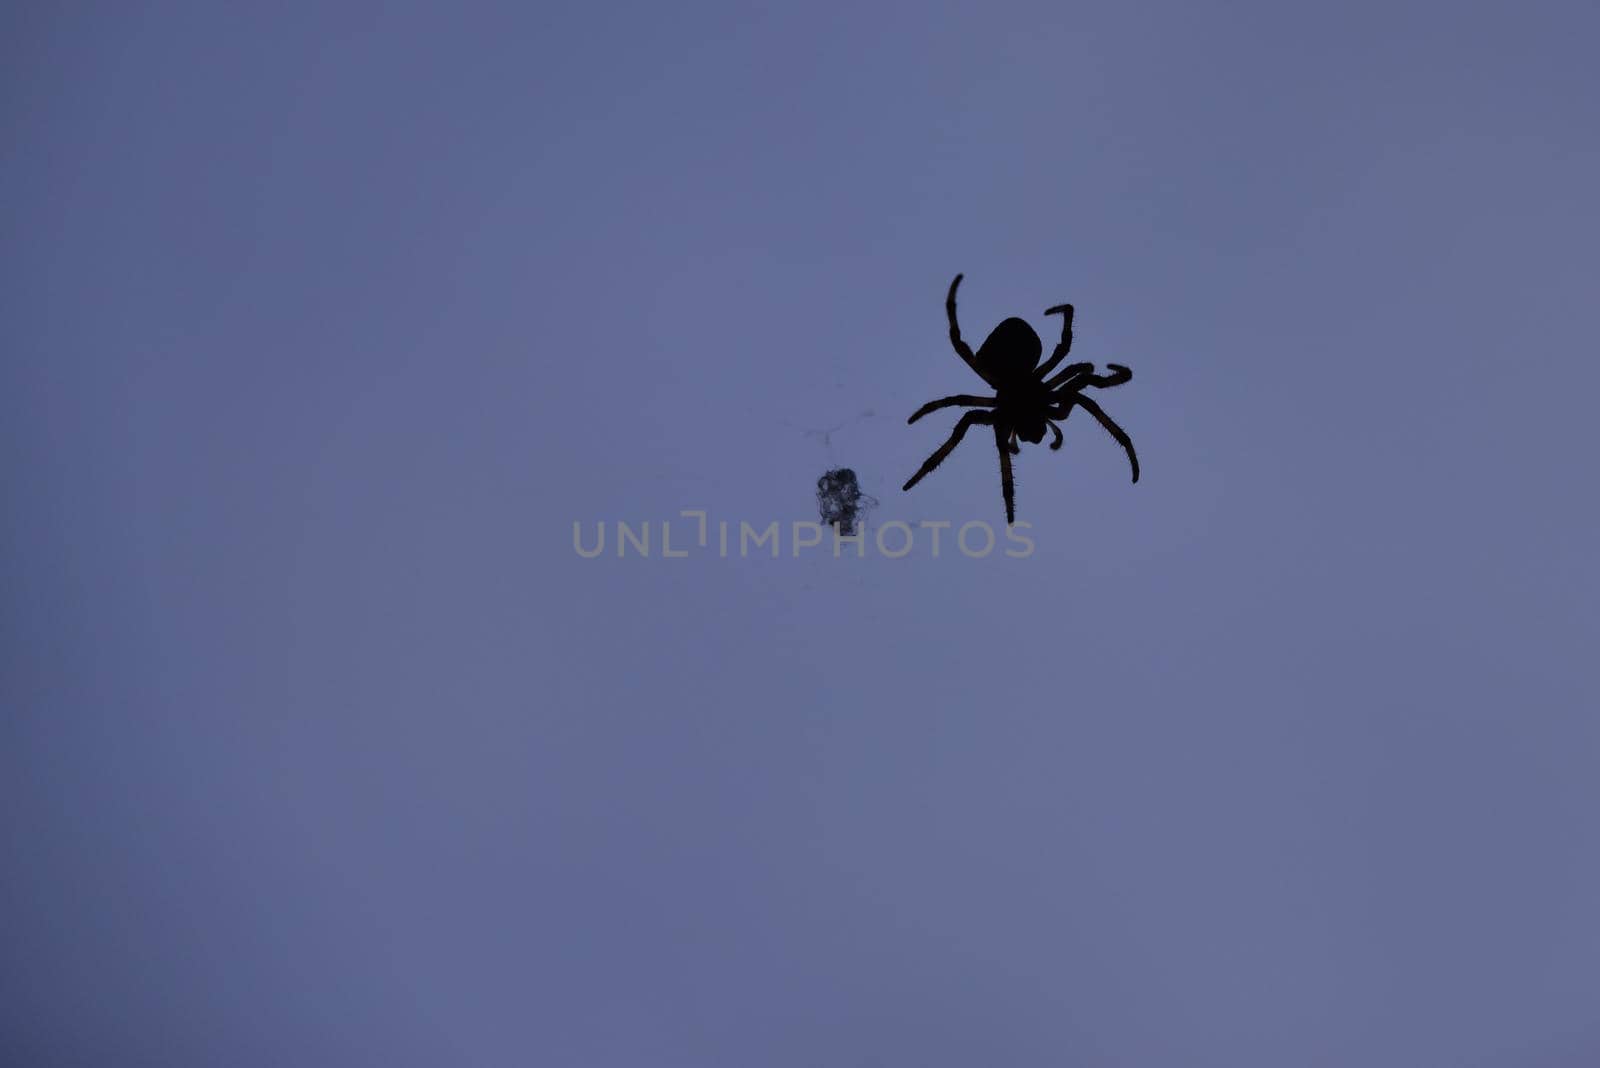 Silhouette of a spider in front of a dramatic blue background.